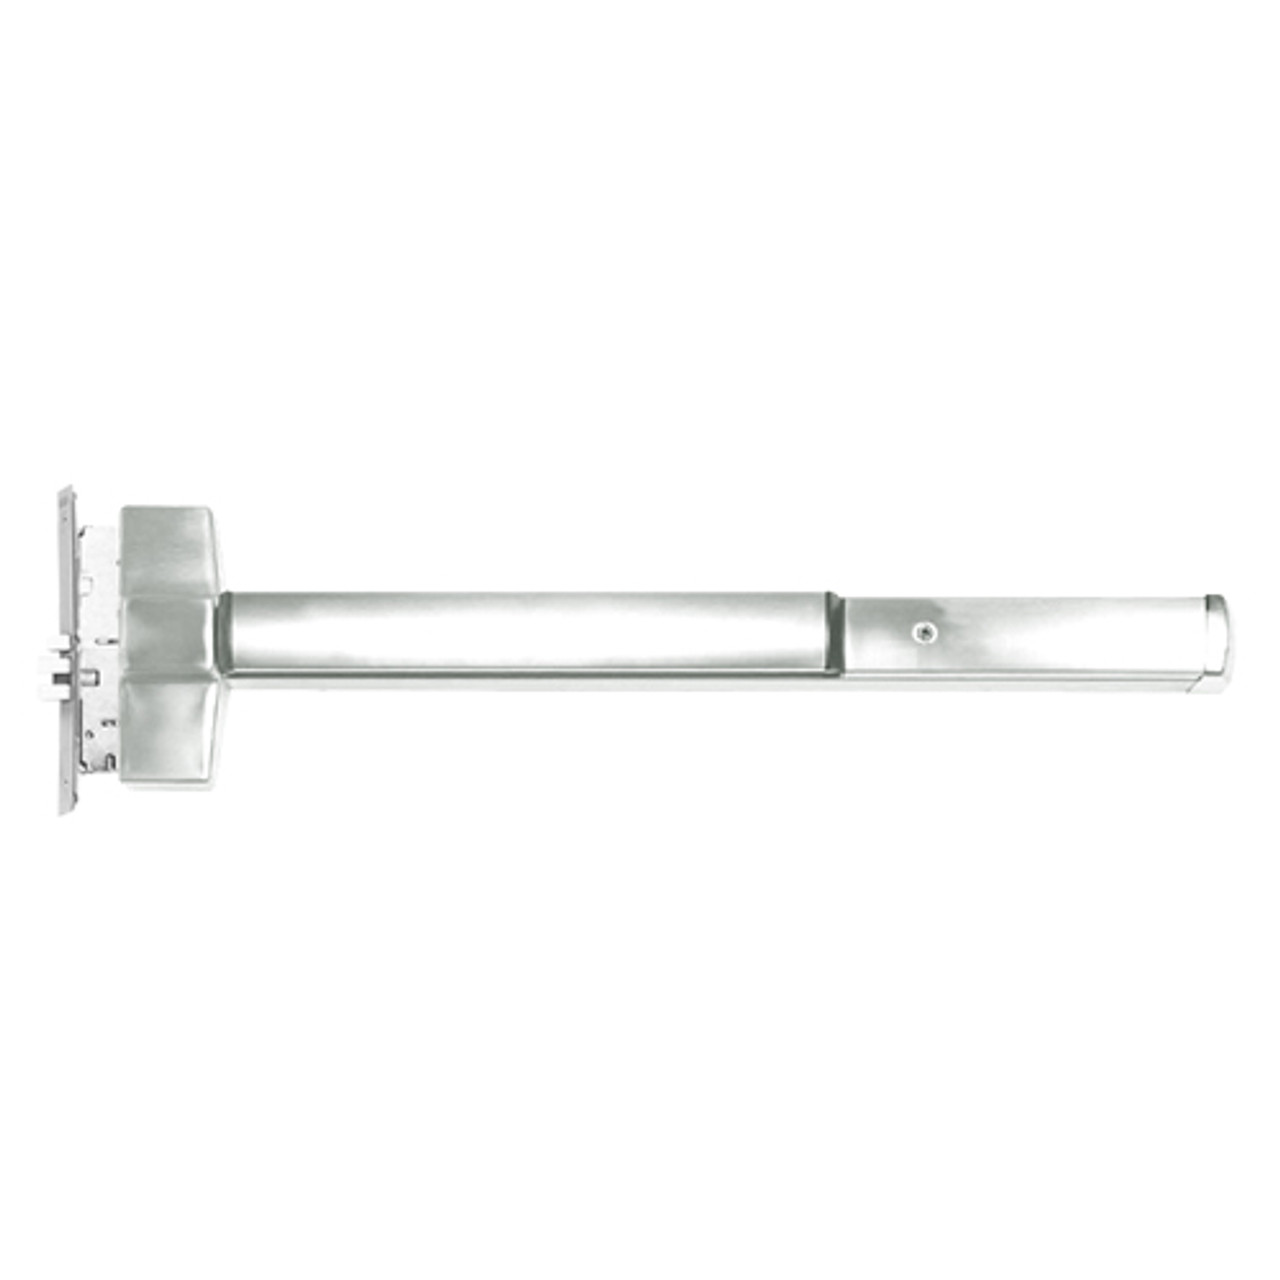 ED5600L-618-W048-LHR-SEC Corbin ED5600 Series Non Fire Rated Mortise Exit Device in Bright Nickel Finish